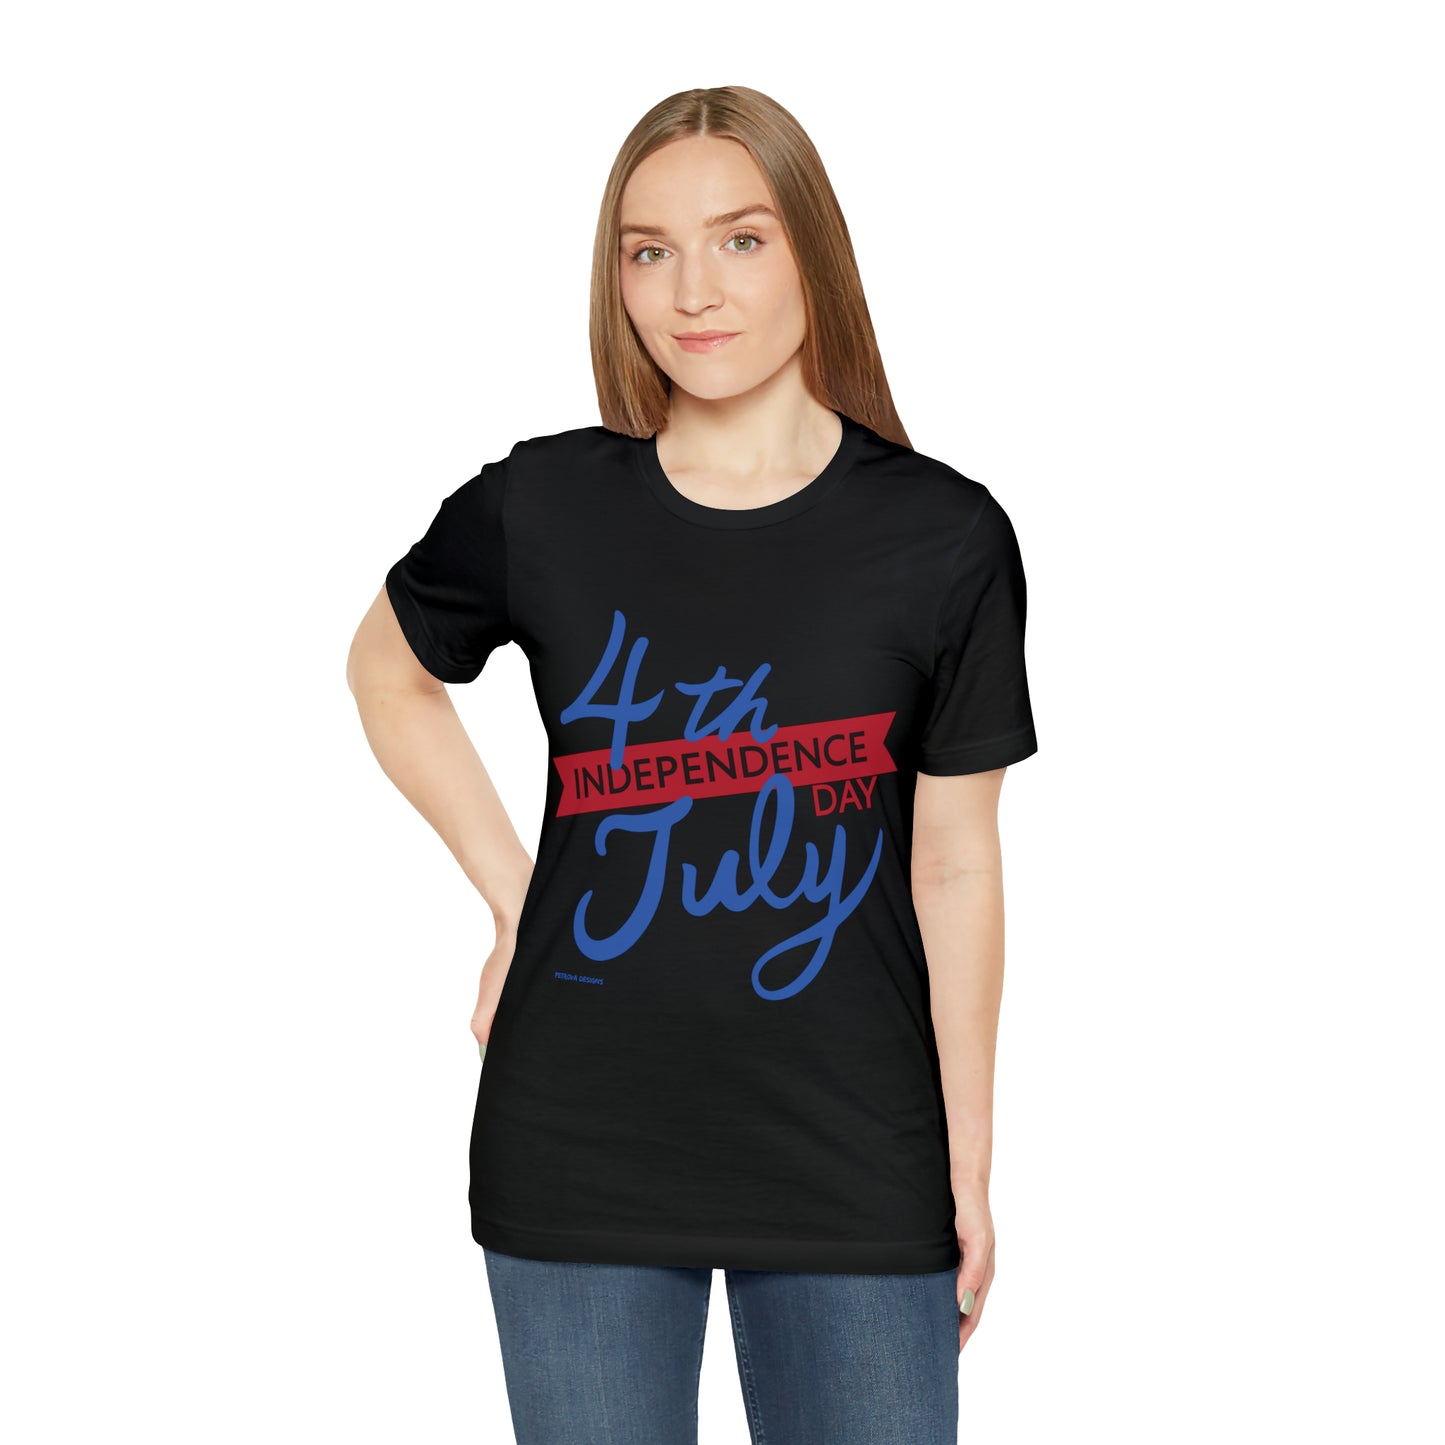 T-Shirt Tshirt Design Gift for Friend and Family Short Sleeved Shirt 4th of July Independence Day Petrova Designs